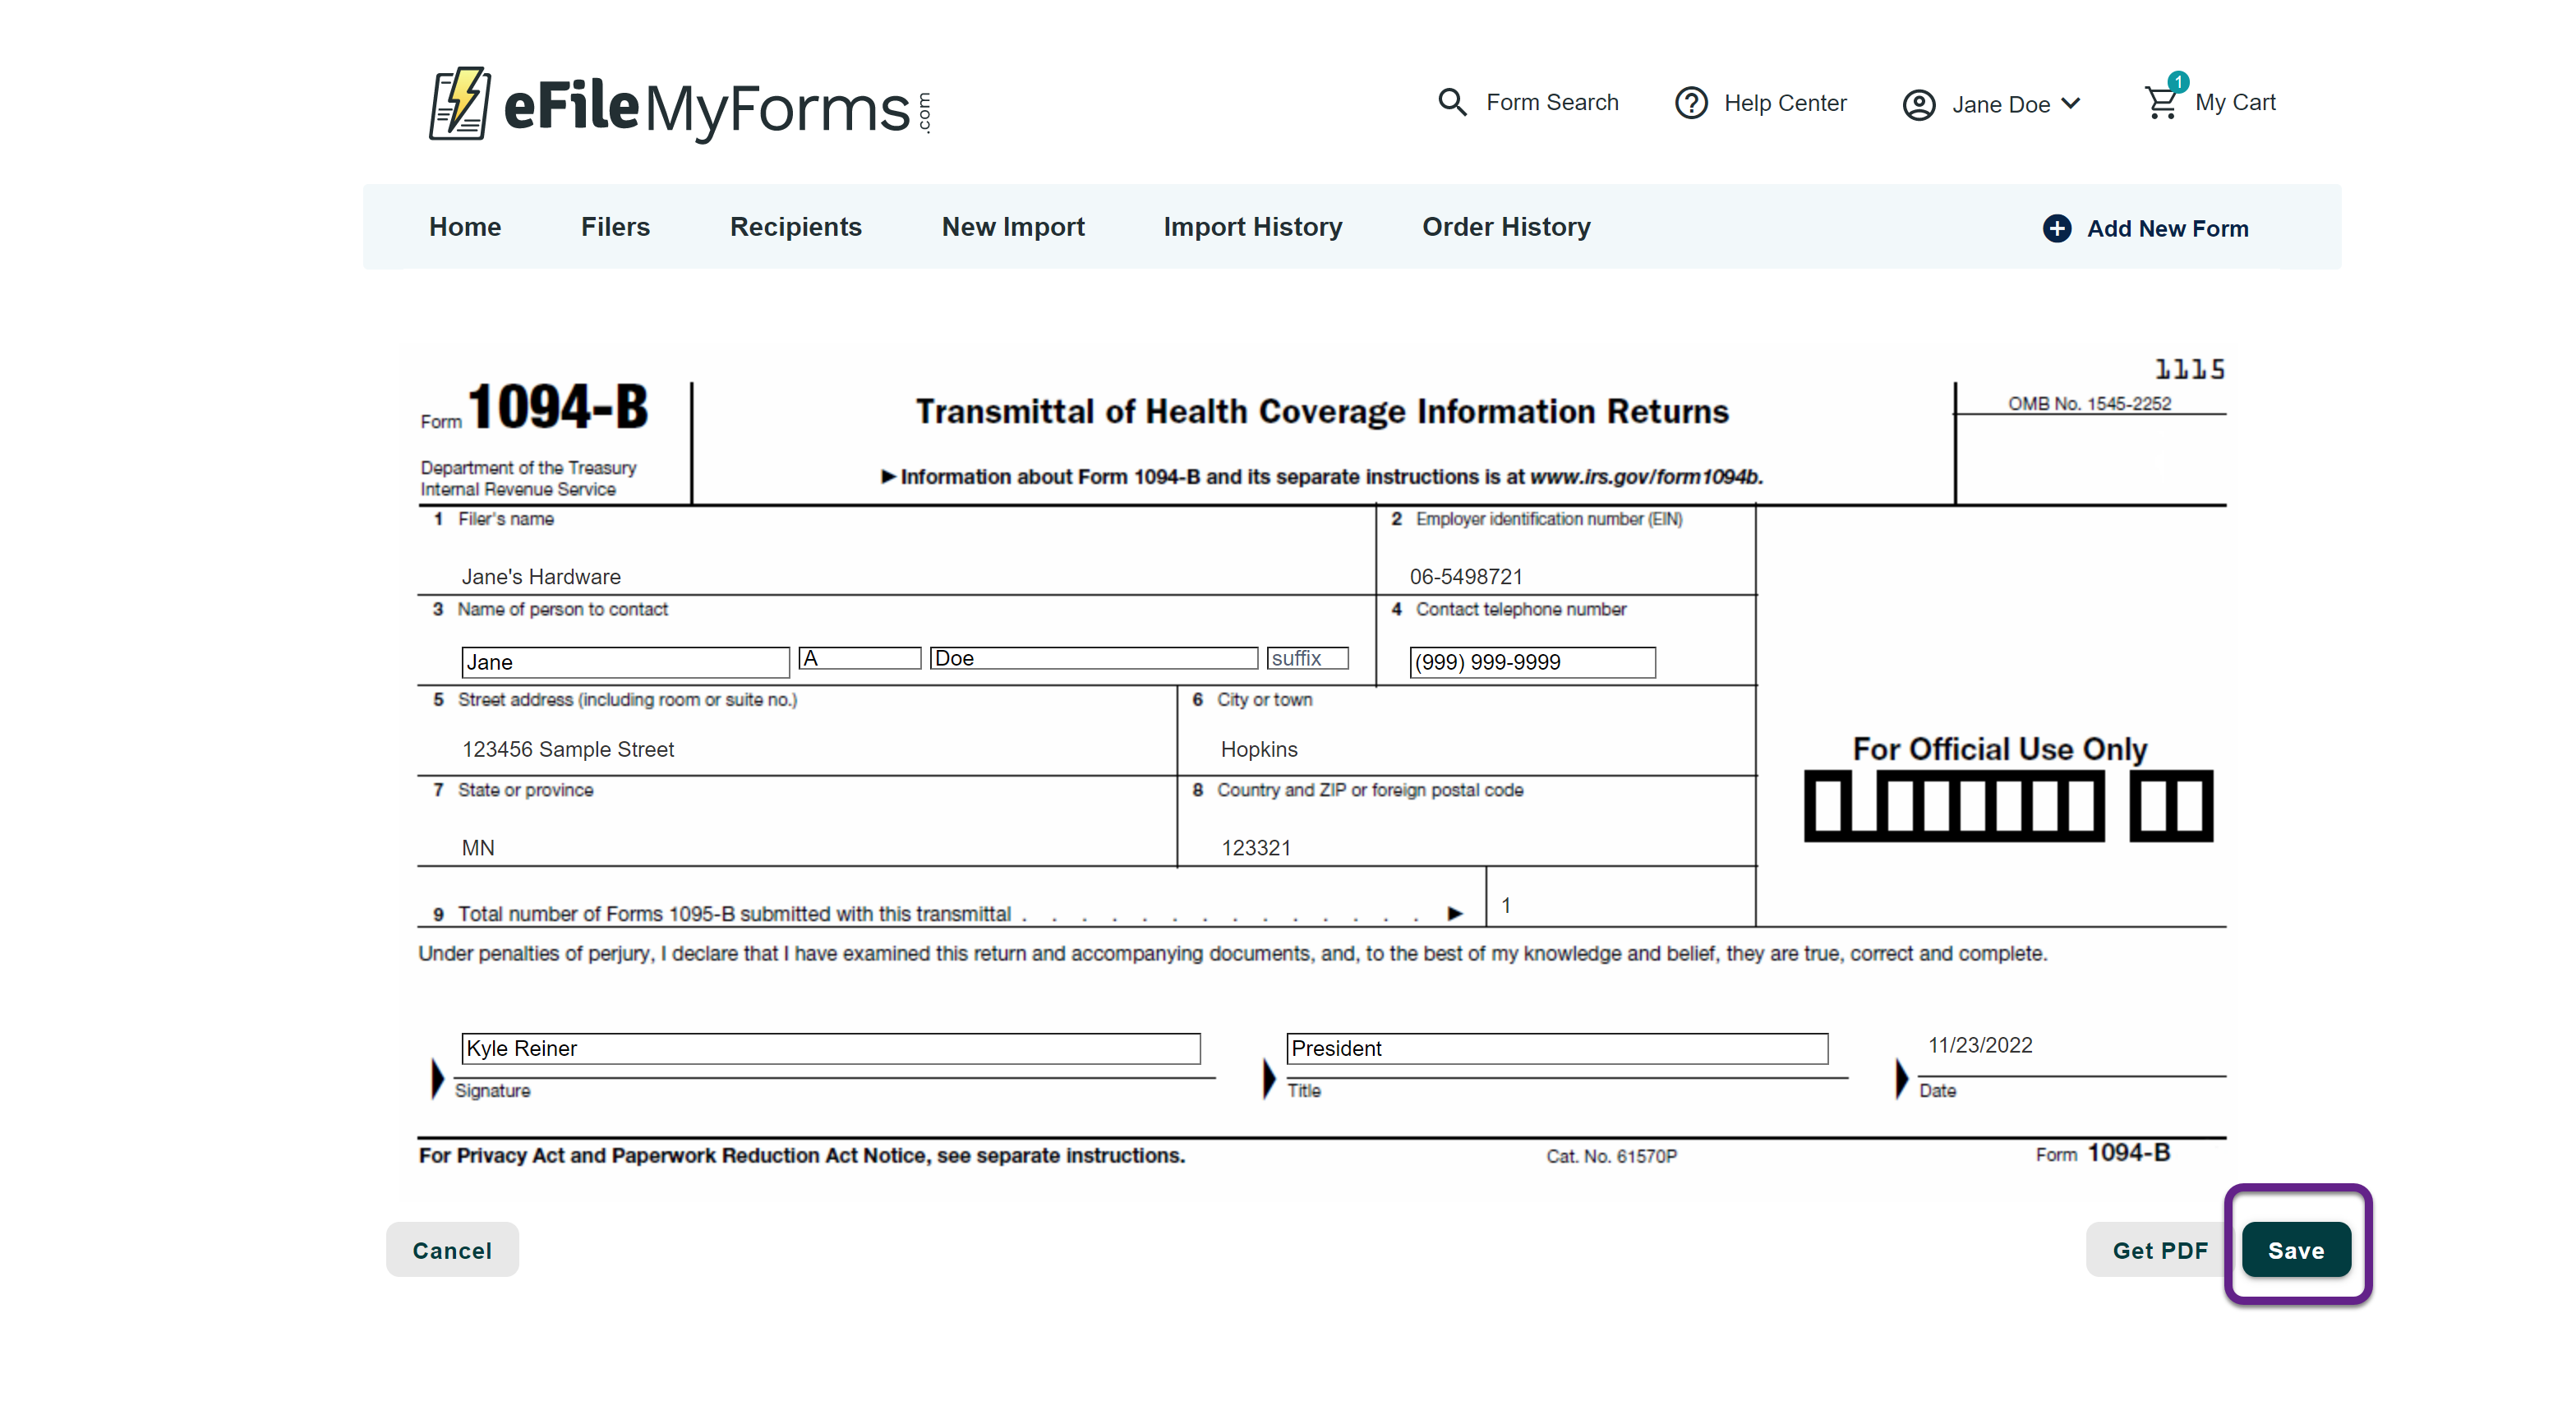 Image of a 1094-B form with a callout on the Save button.